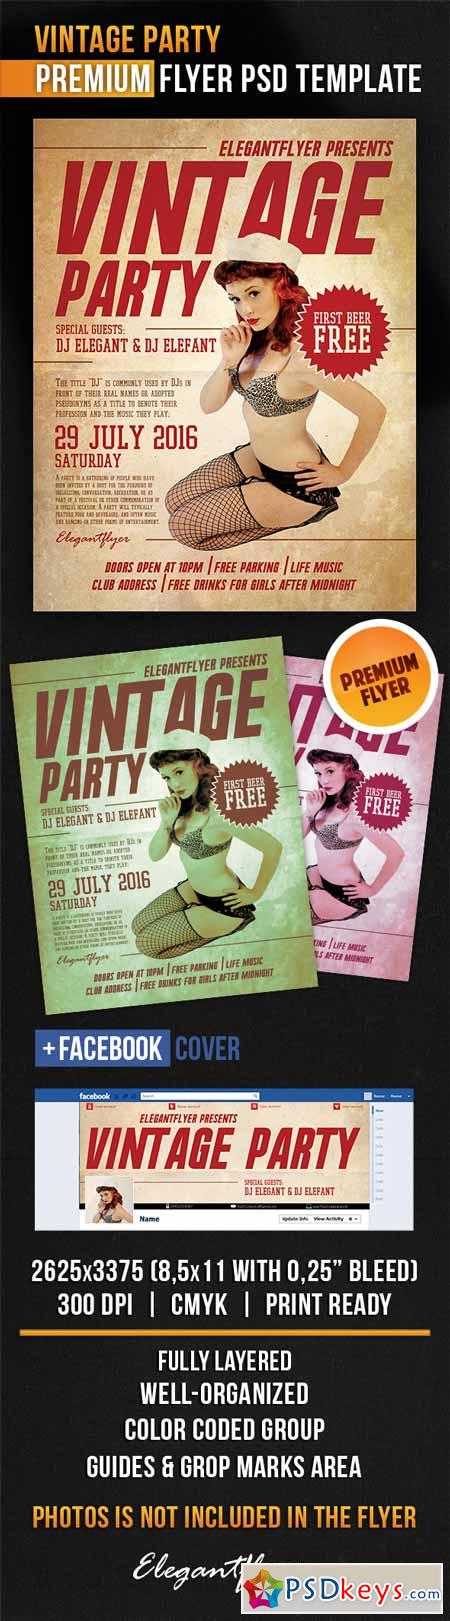 Vintage Party – Flyer PSD Template + Facebook Cover